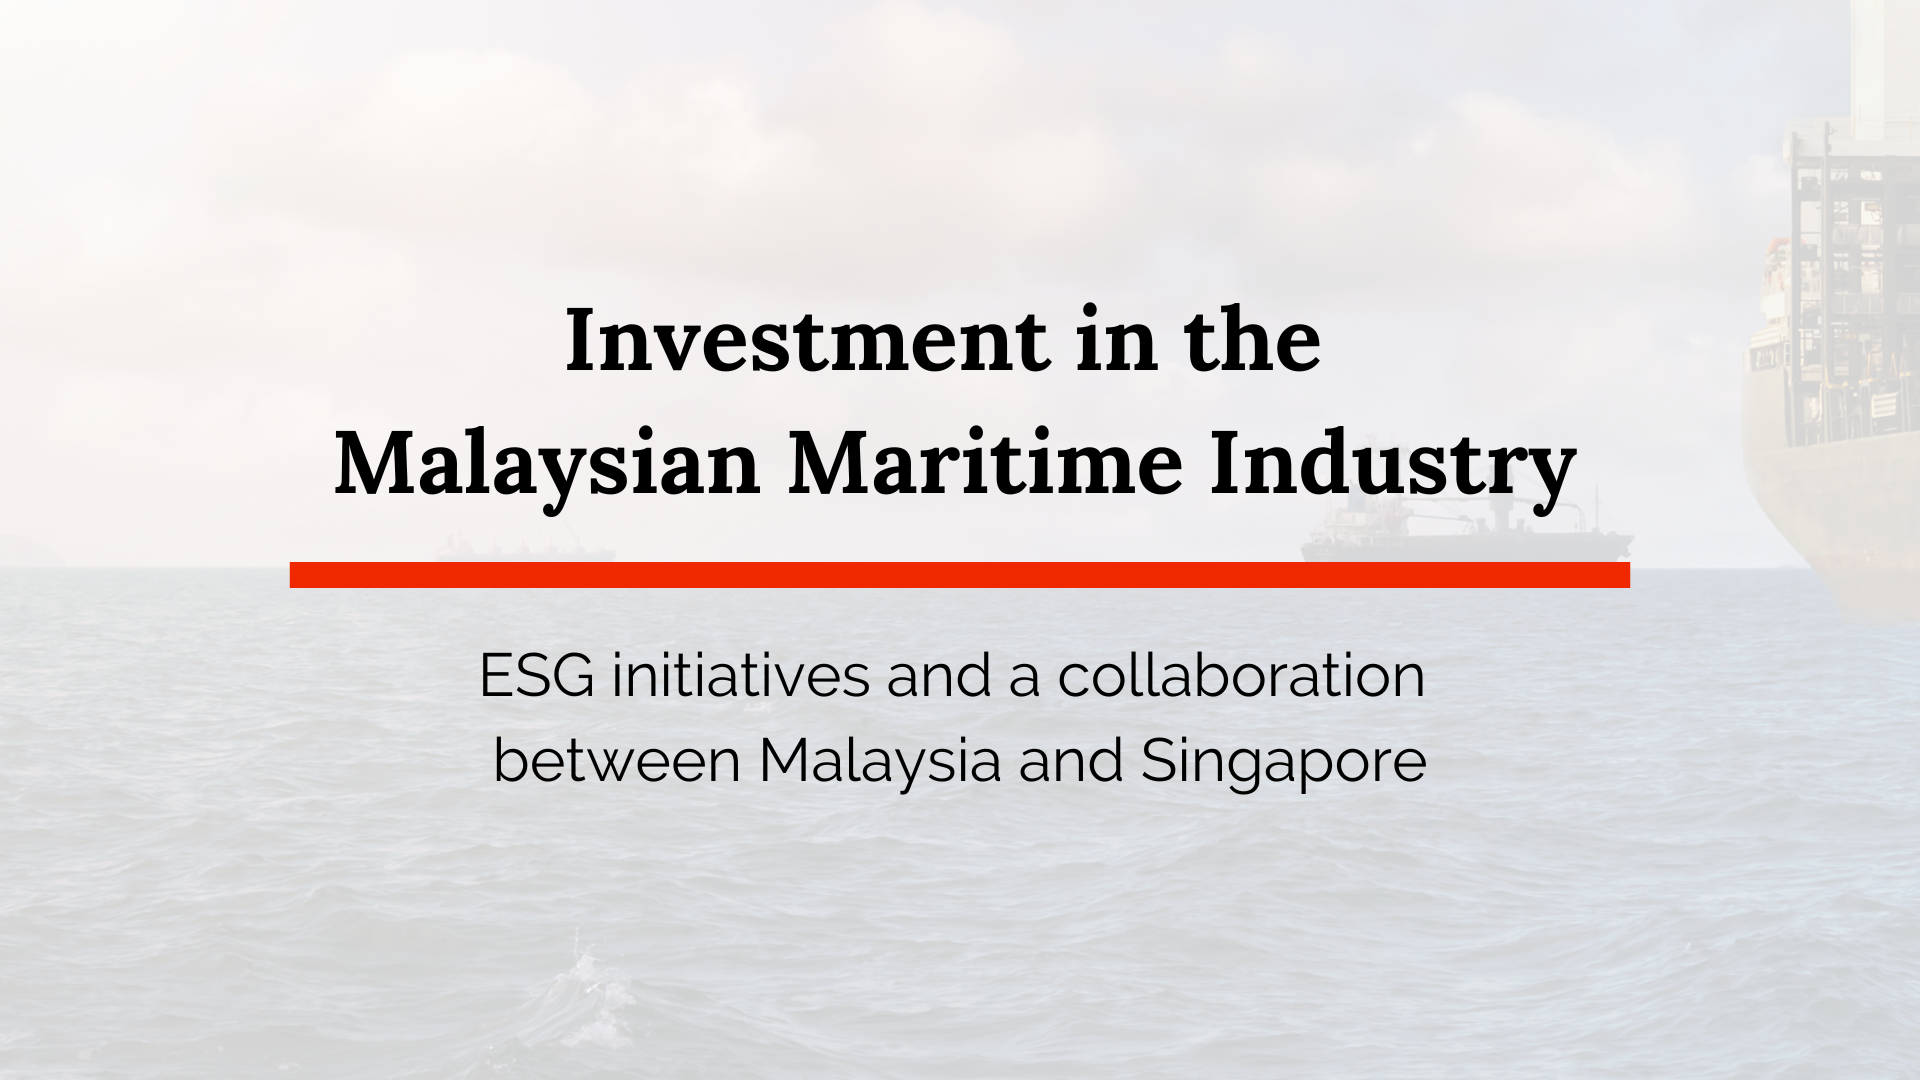 Investment in the Malaysian Maritime Industry and an ESG collaborative effort between the two countries.